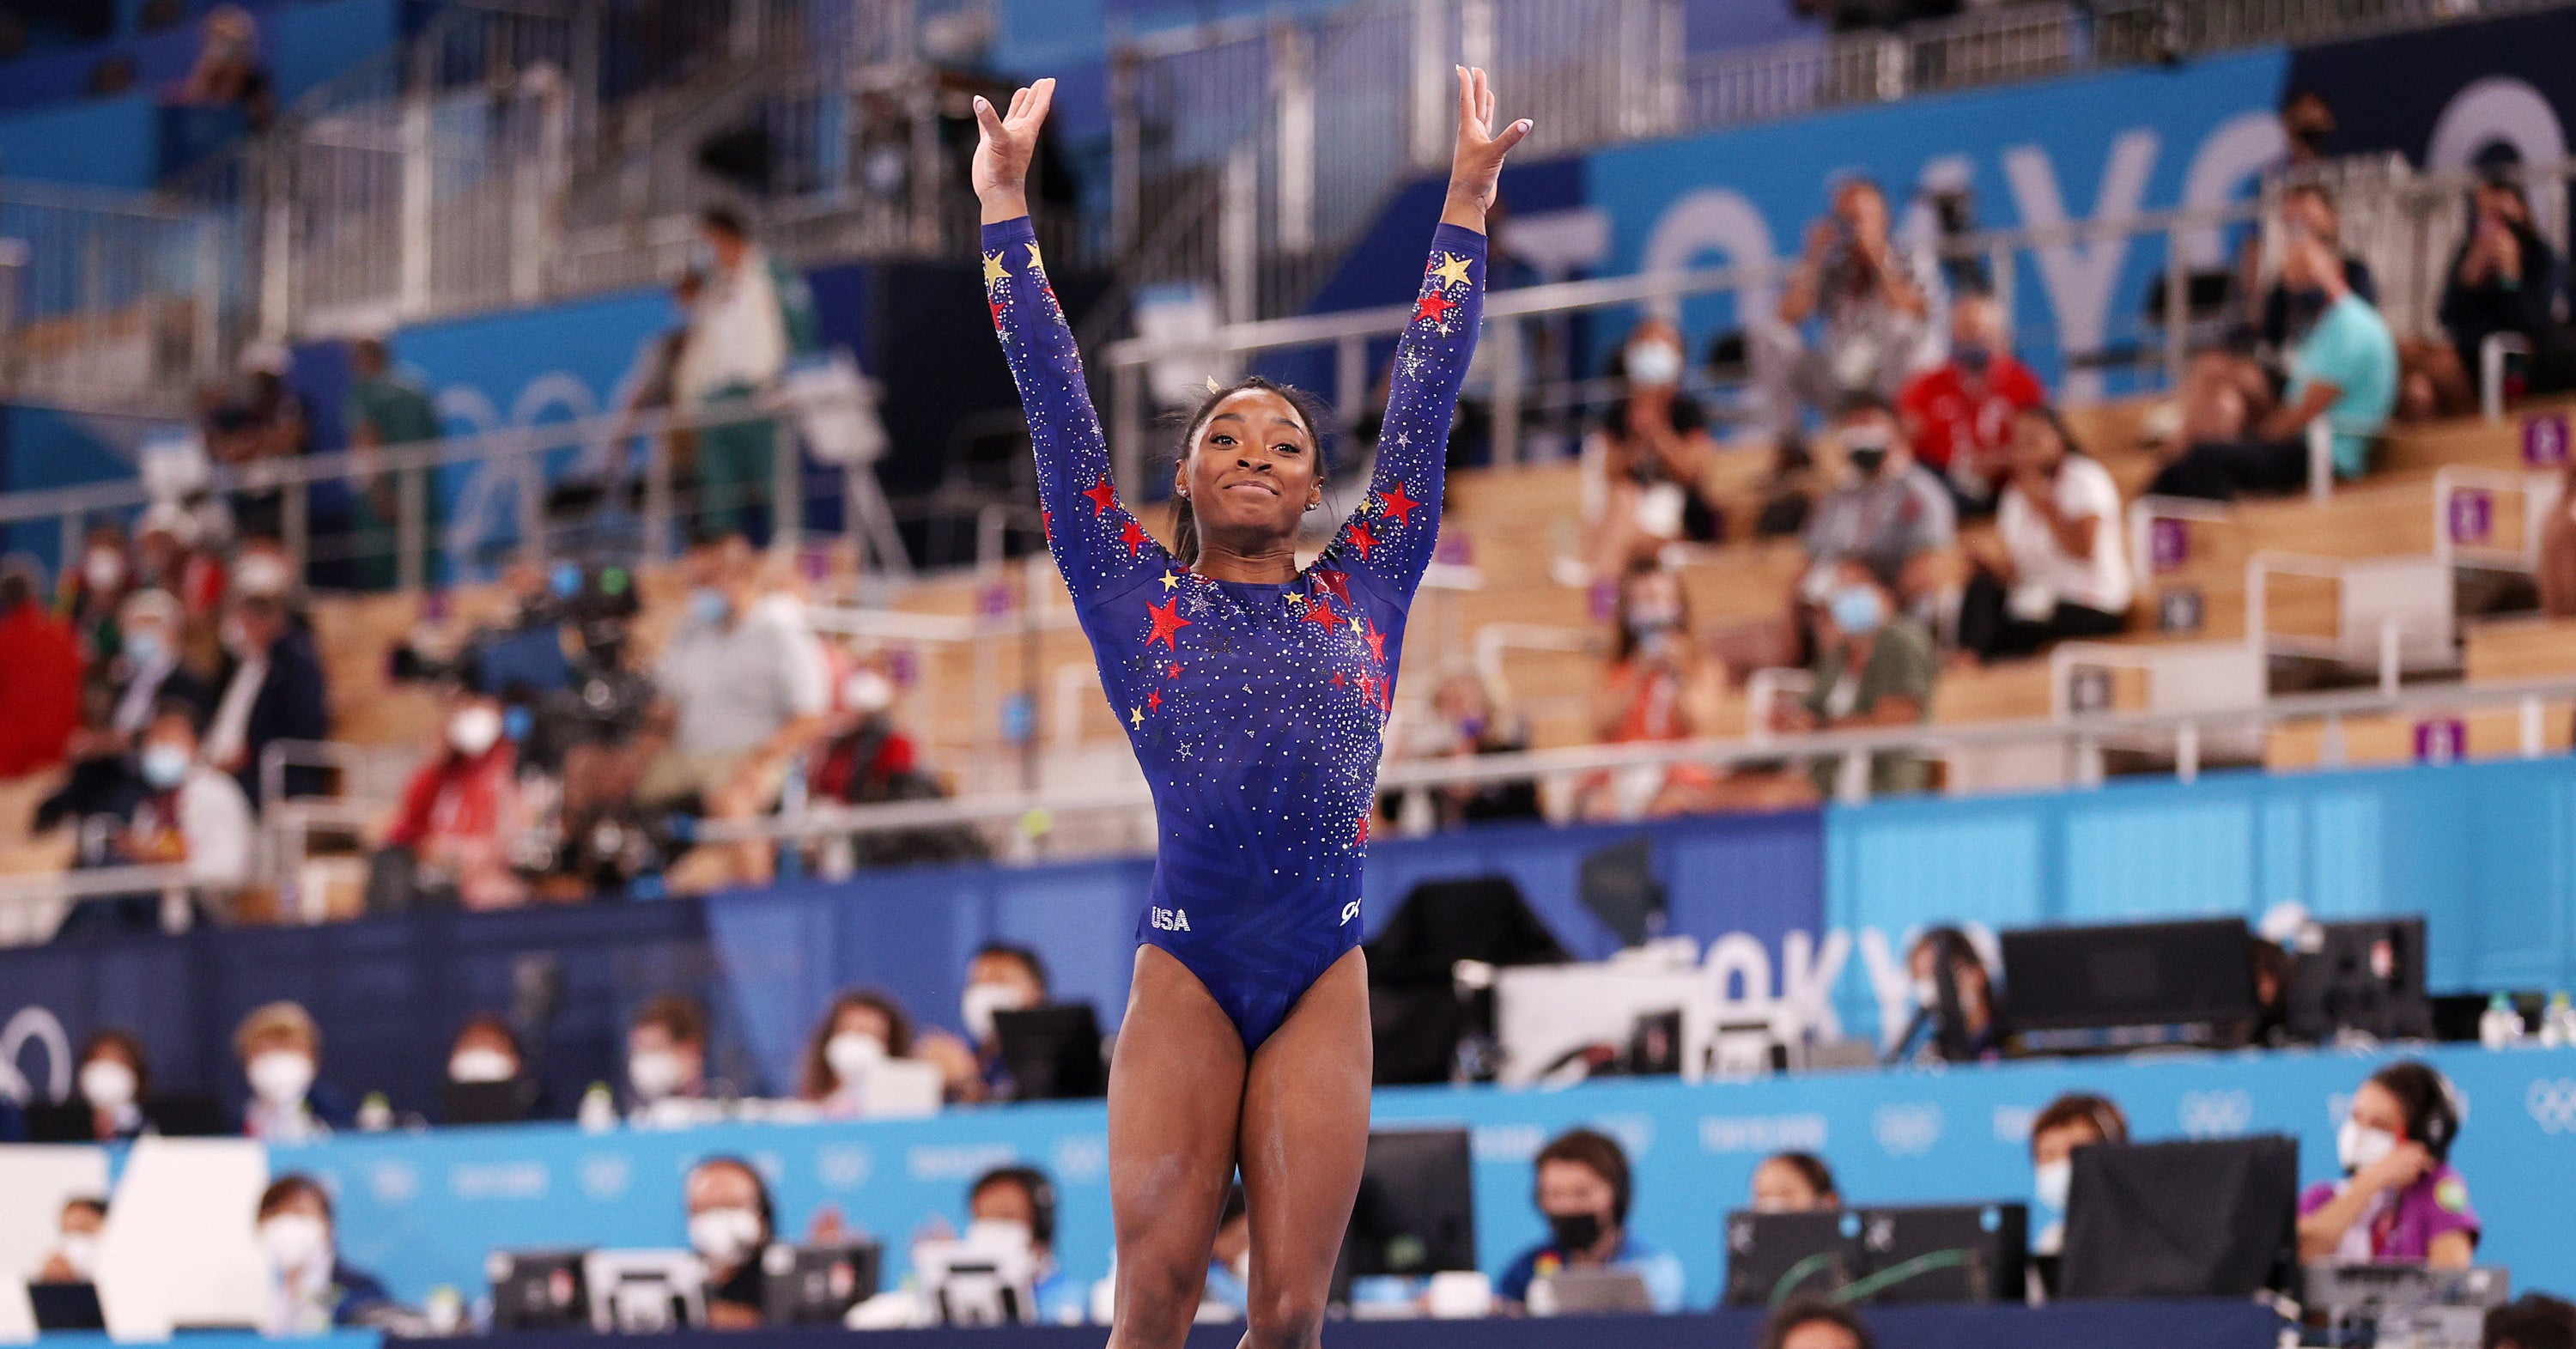 What Simone Biles Did At The Olympics Is Revolutionary